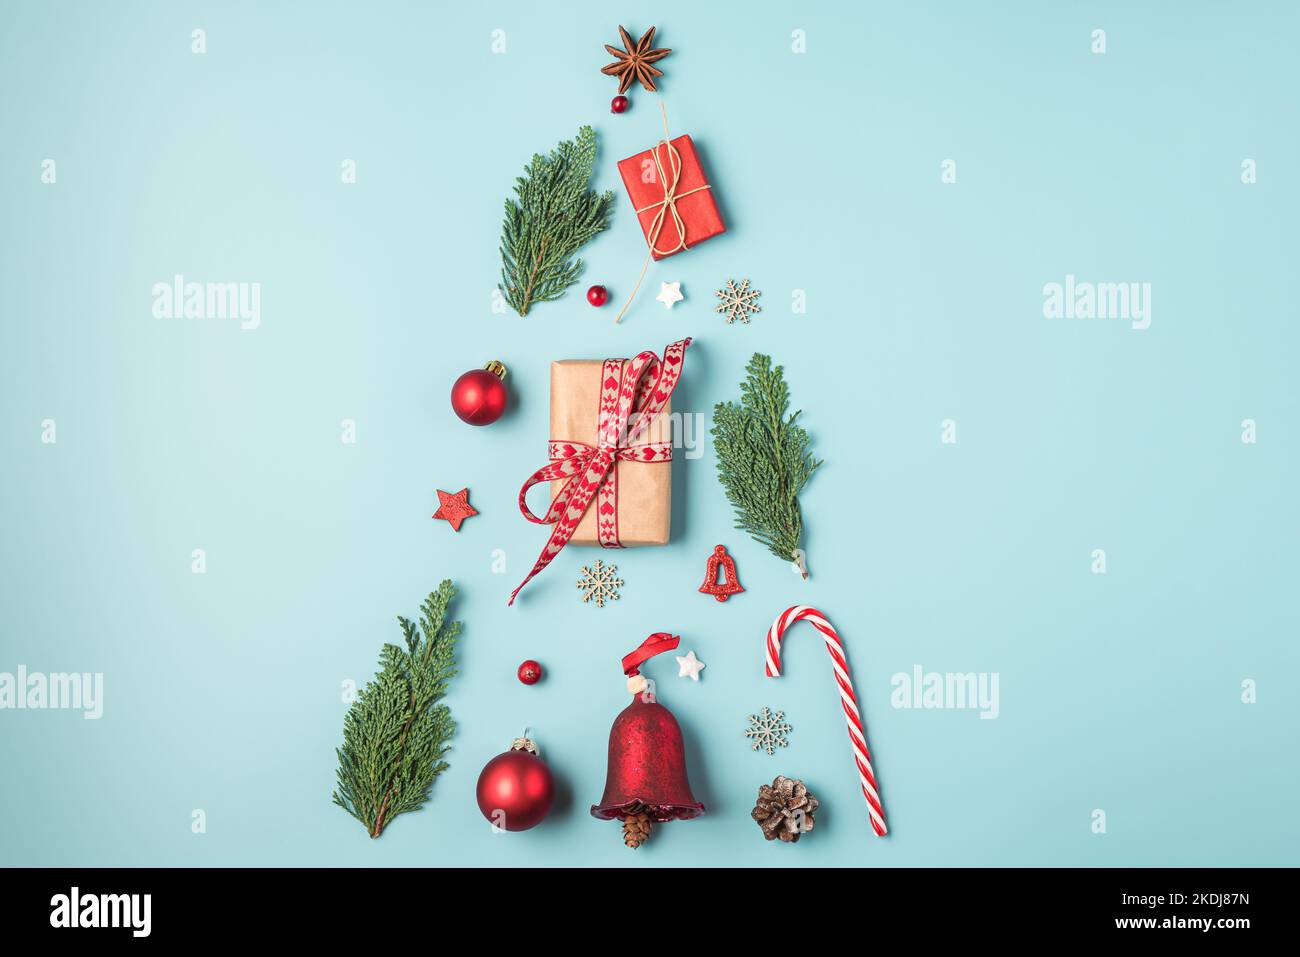 Christmas fir tree made of holiday decorations, gift boxes, fir branches on blue background. Flat lay. Top view. Festive background Stock Photo